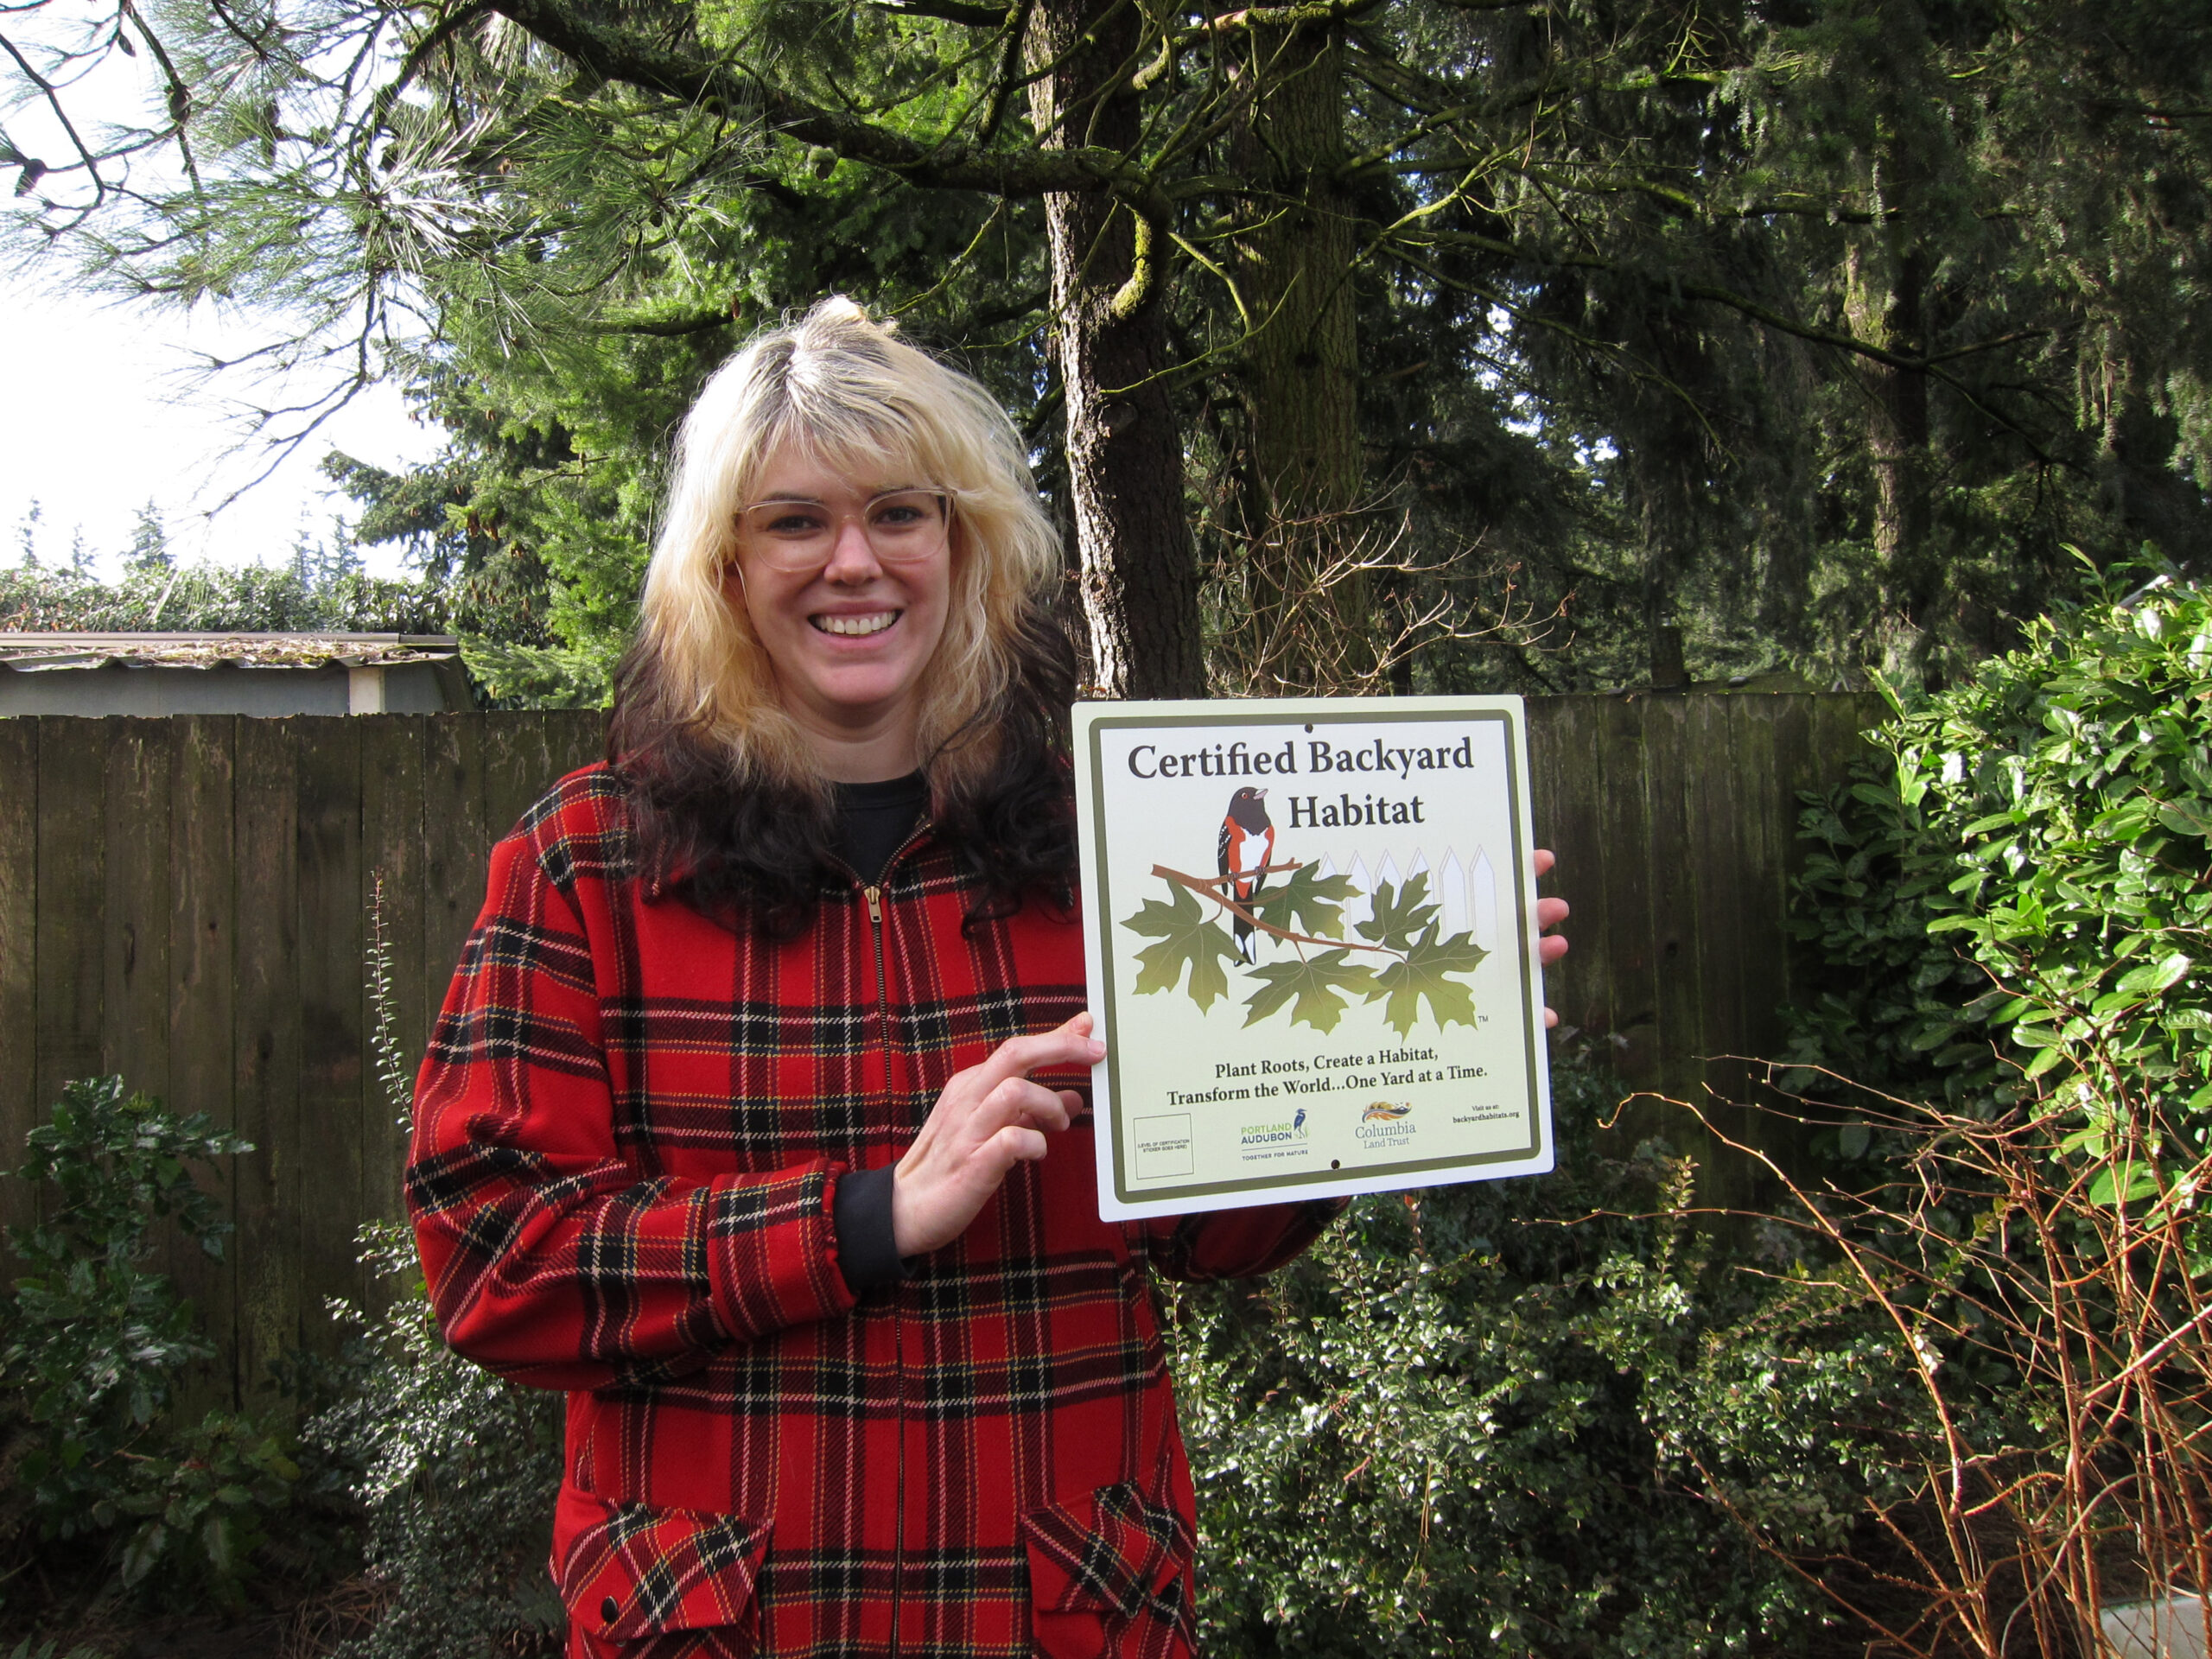 A woman in a plaid coat holding a sign.